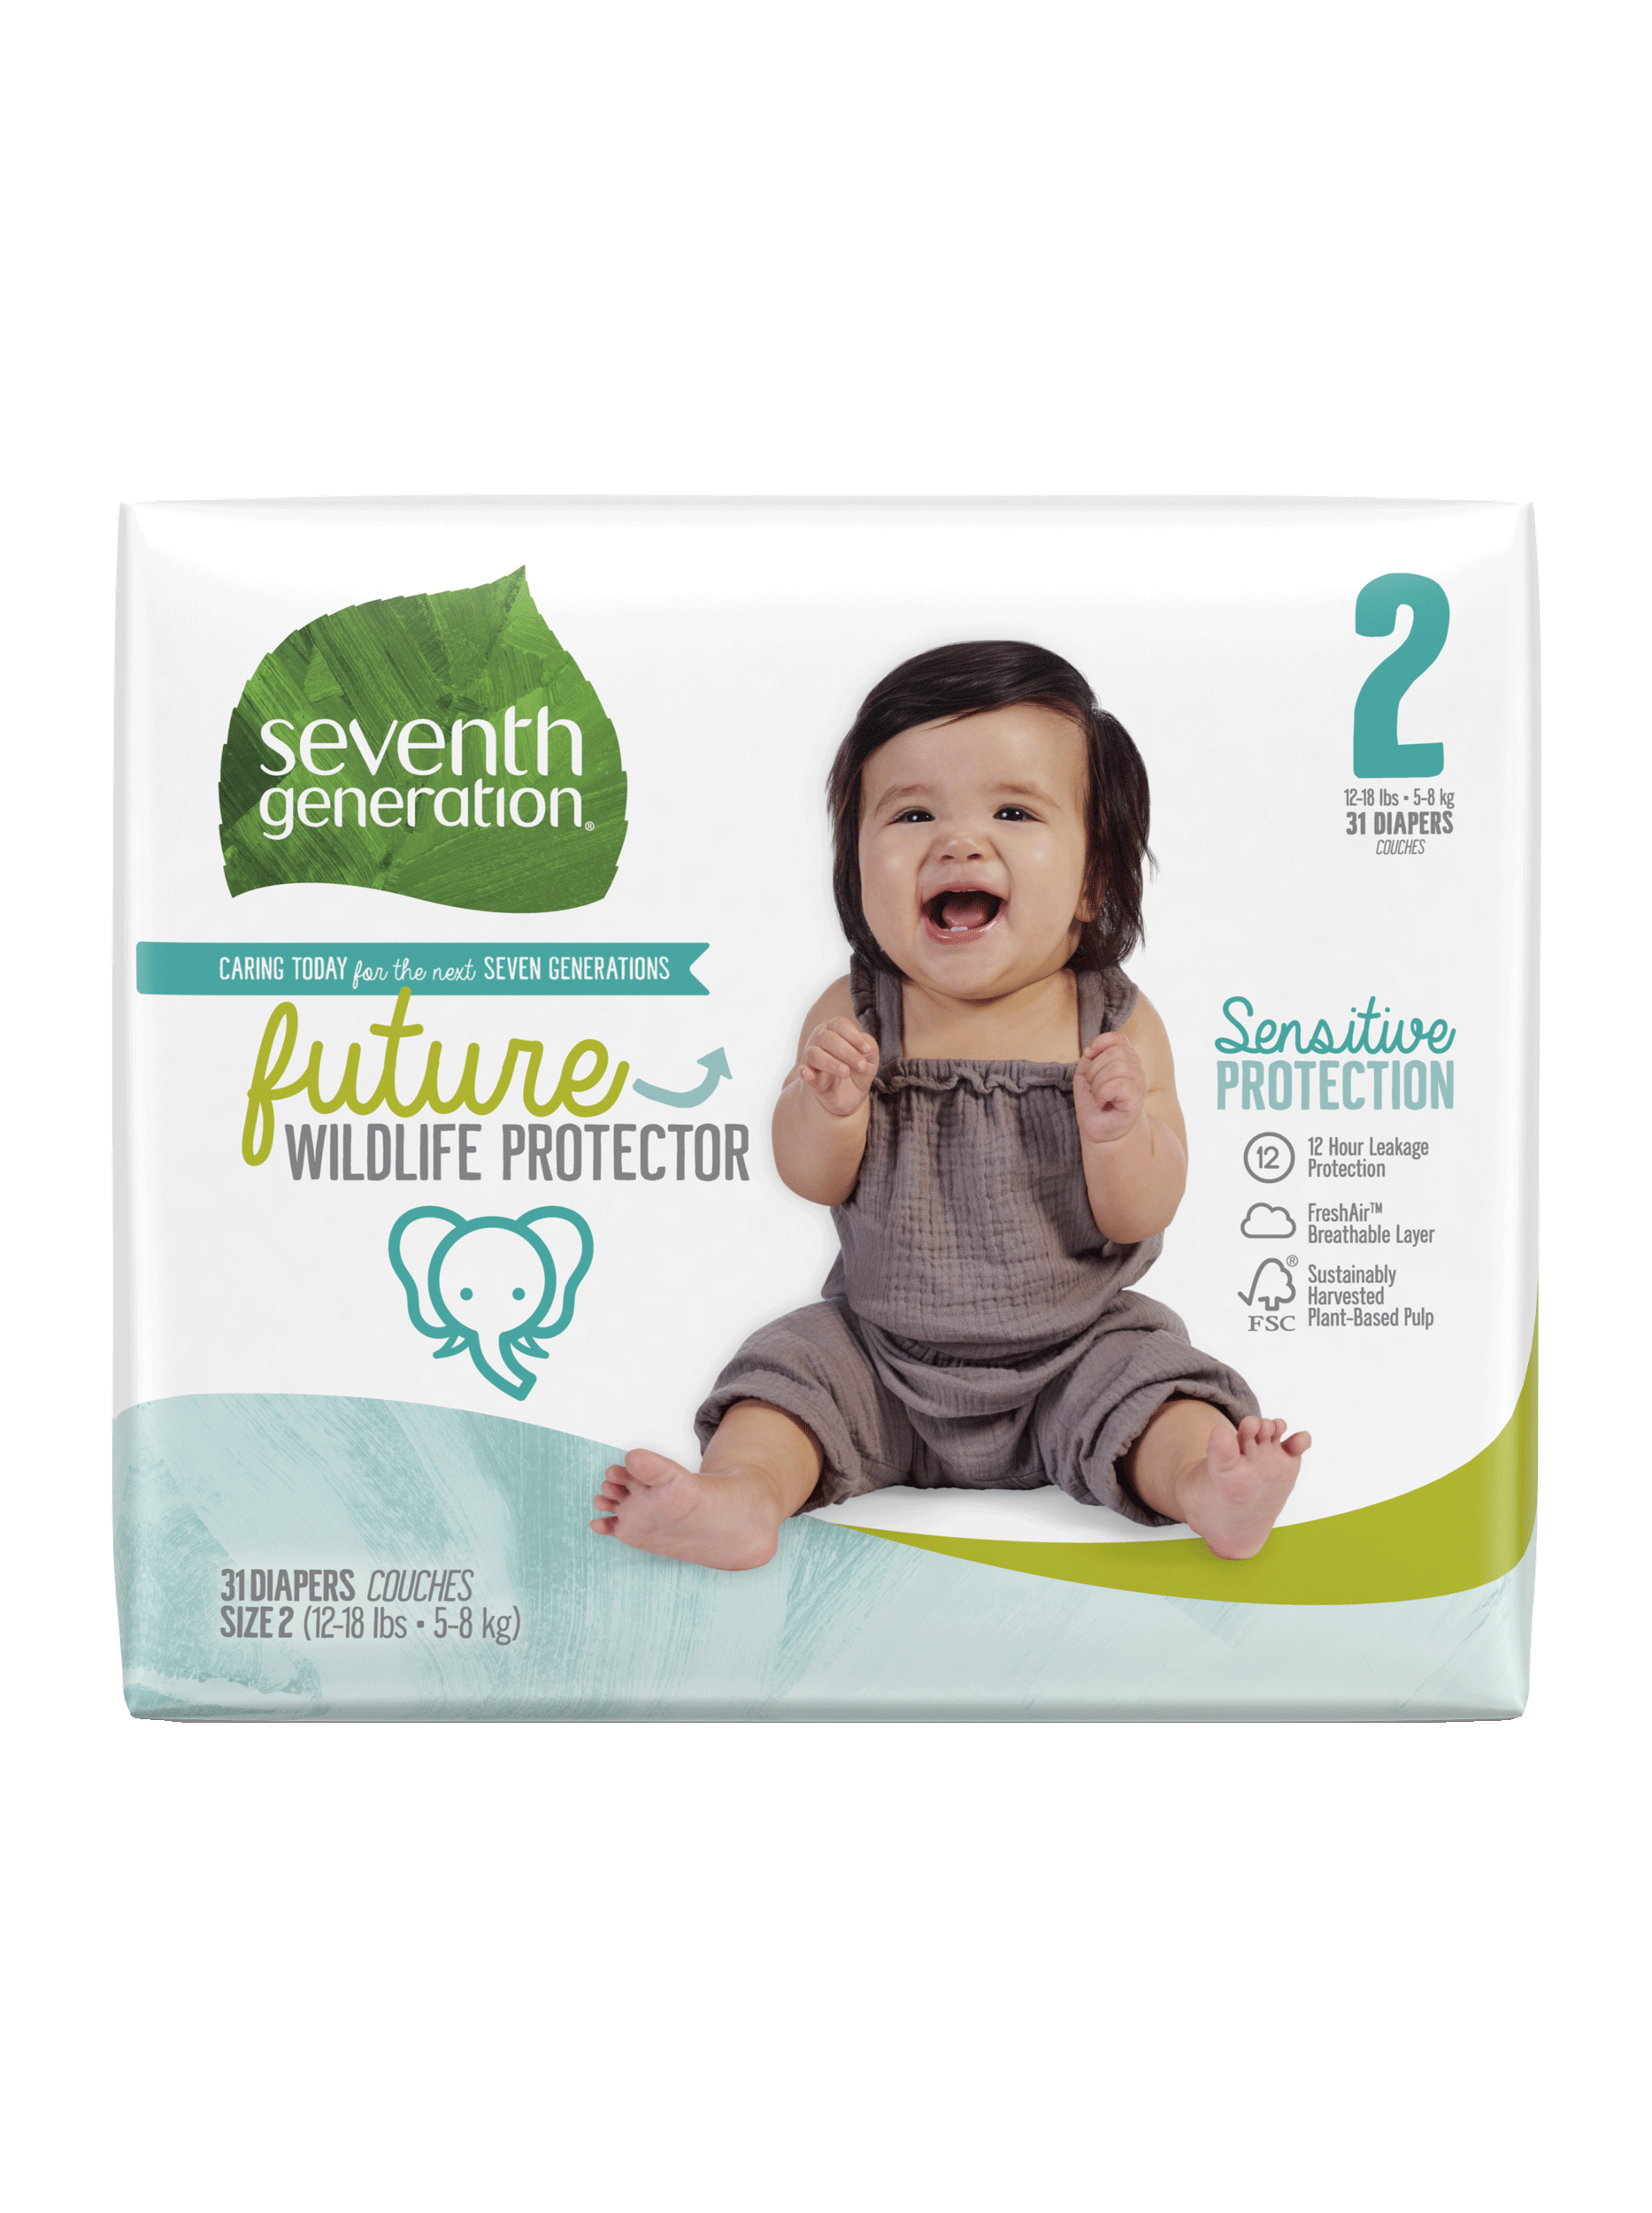 Seventh Generation Overnight Diapers, Size 4